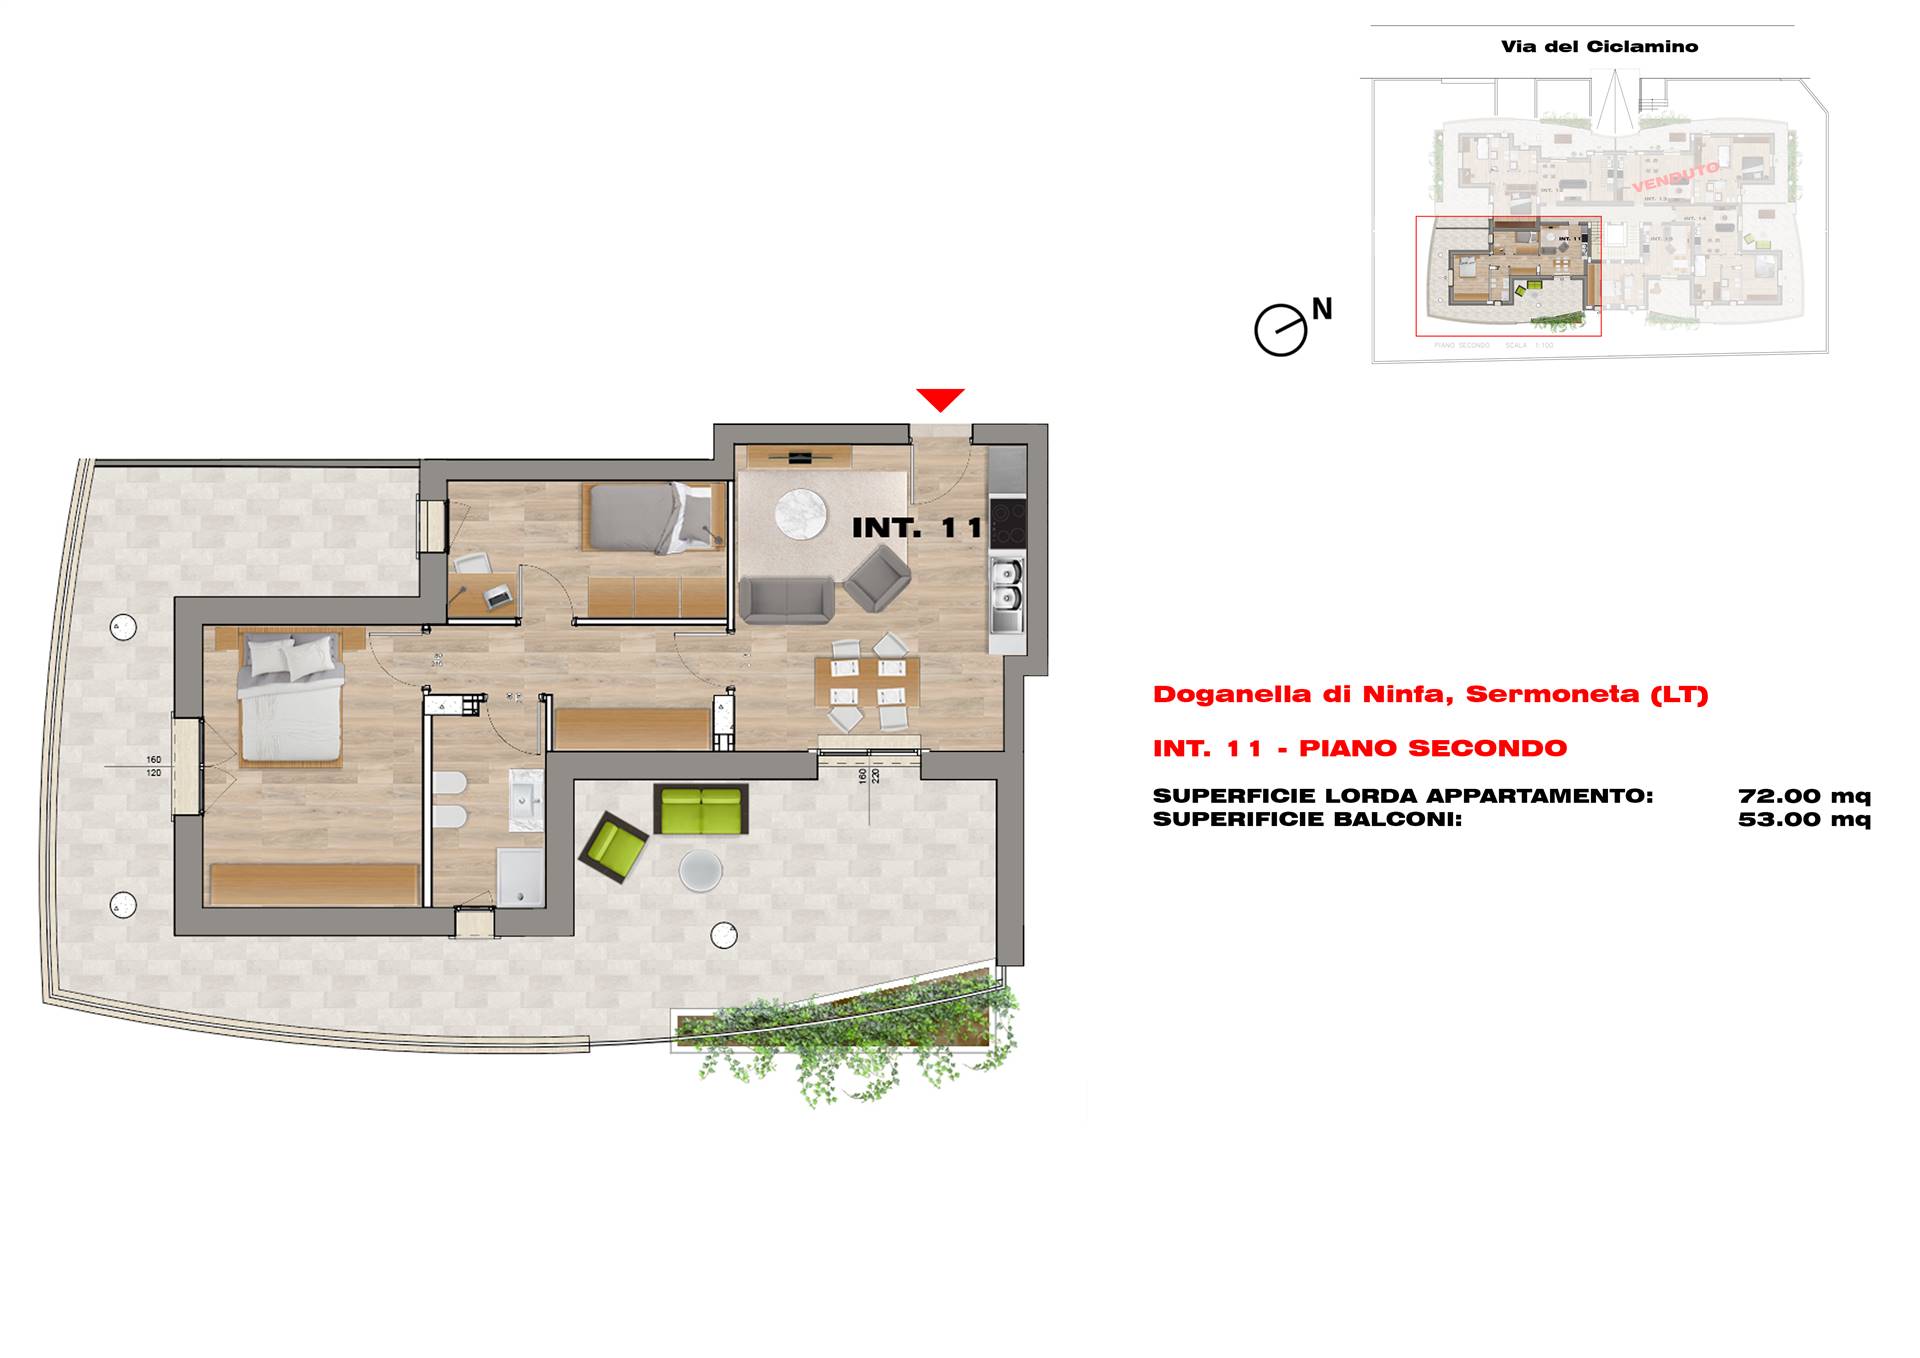 BIVIO DI DOGANELLA, SERMONETA, Apartment for sale of 72 Sq. mt., New construction, Heating Centralized, placed at 2° on 3, composed by: 4 Rooms, 